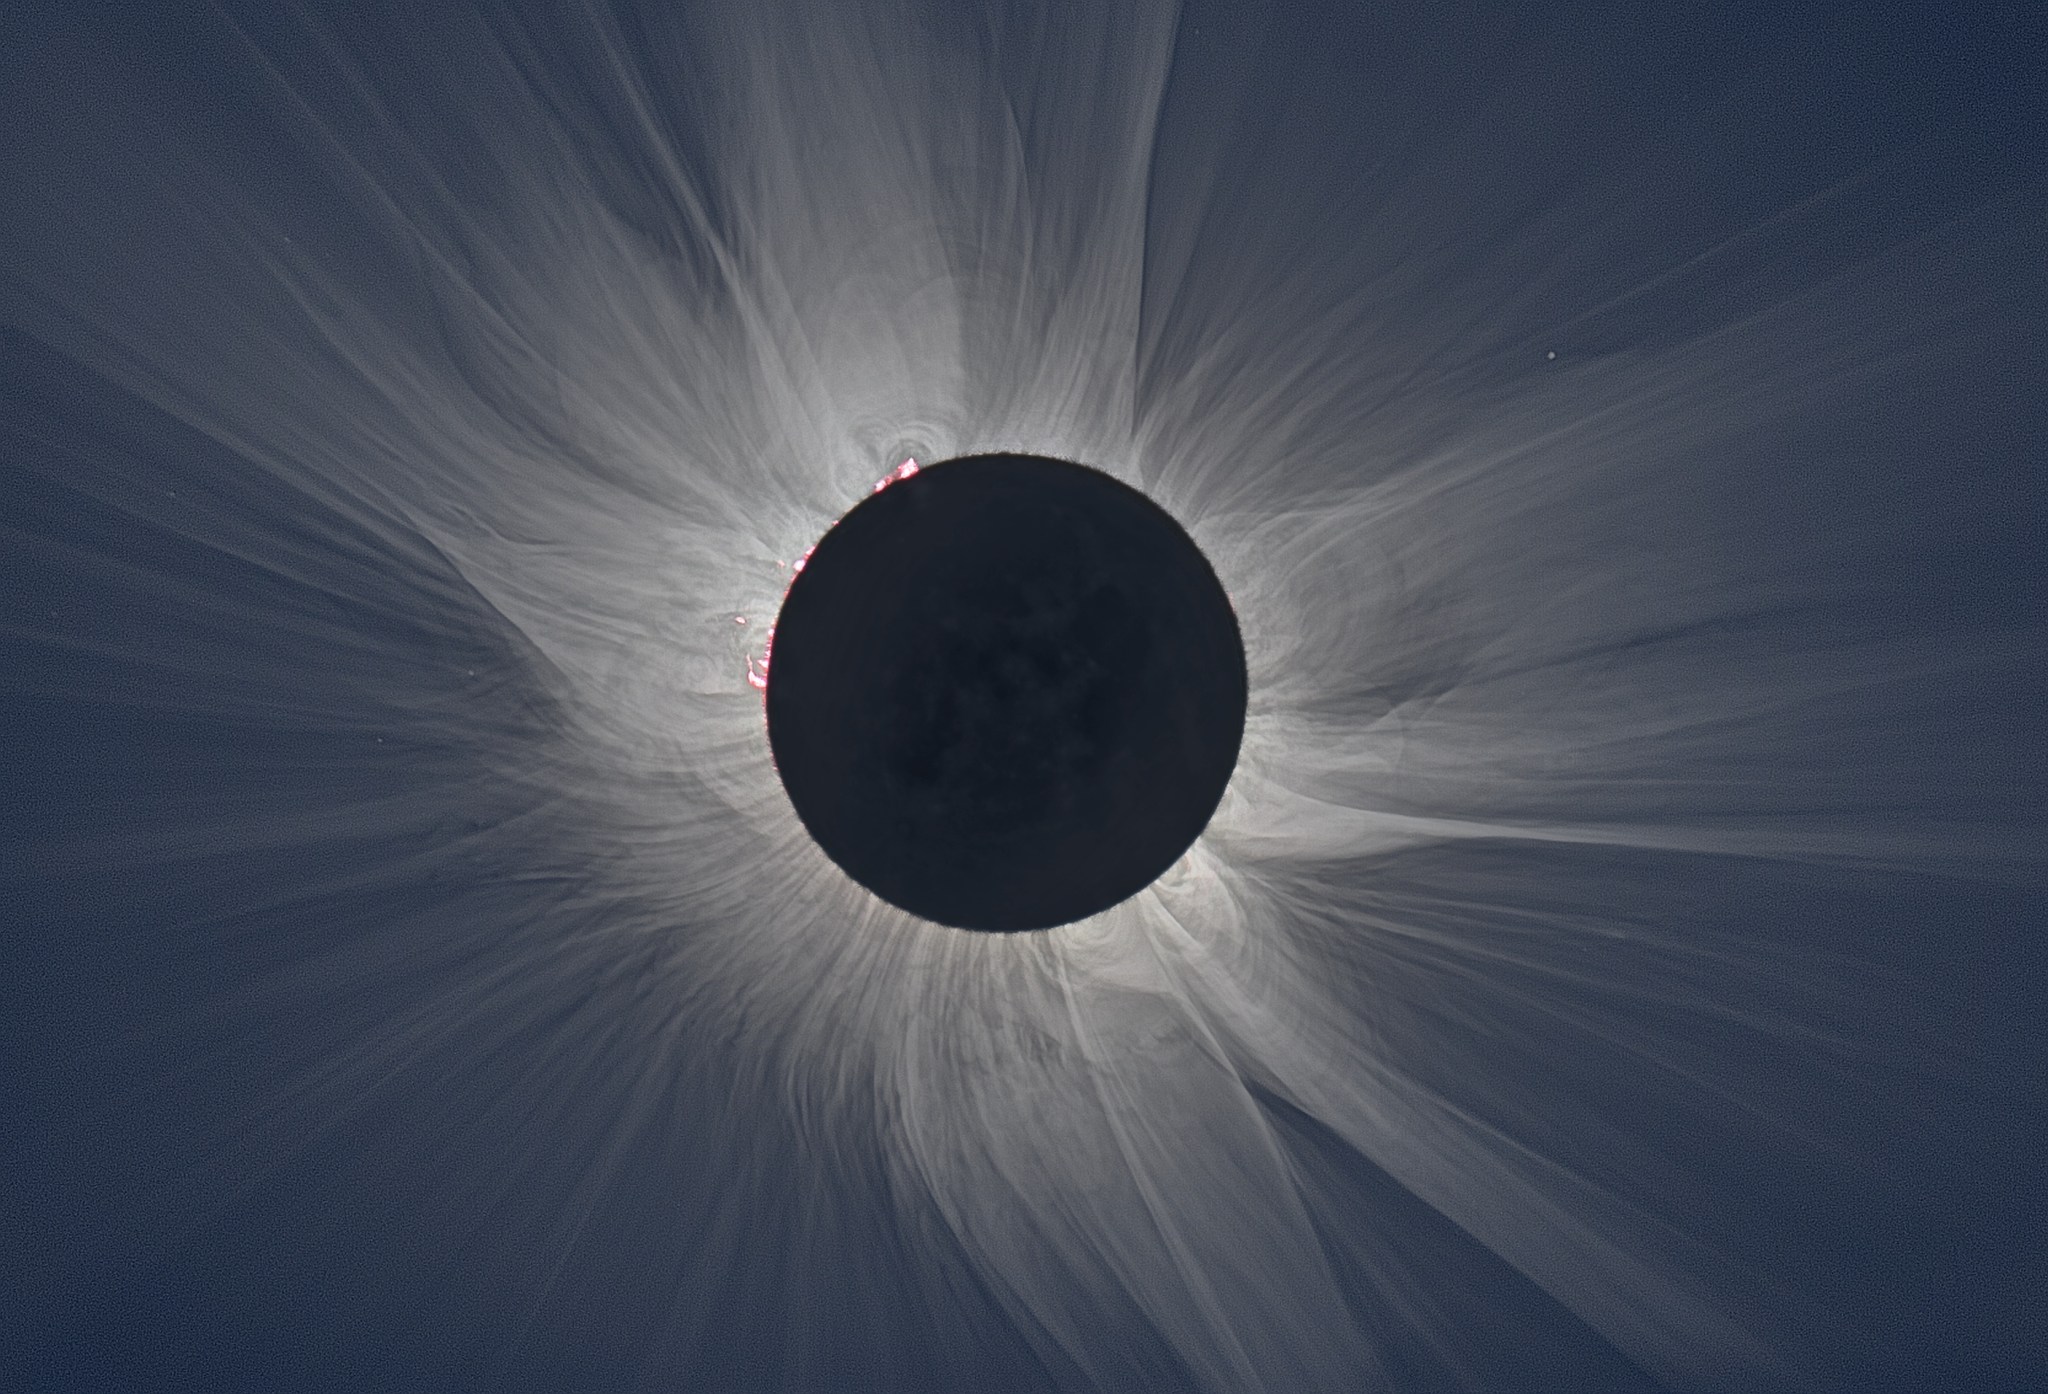 white light image of the solar corona during totality of a solar eclipse